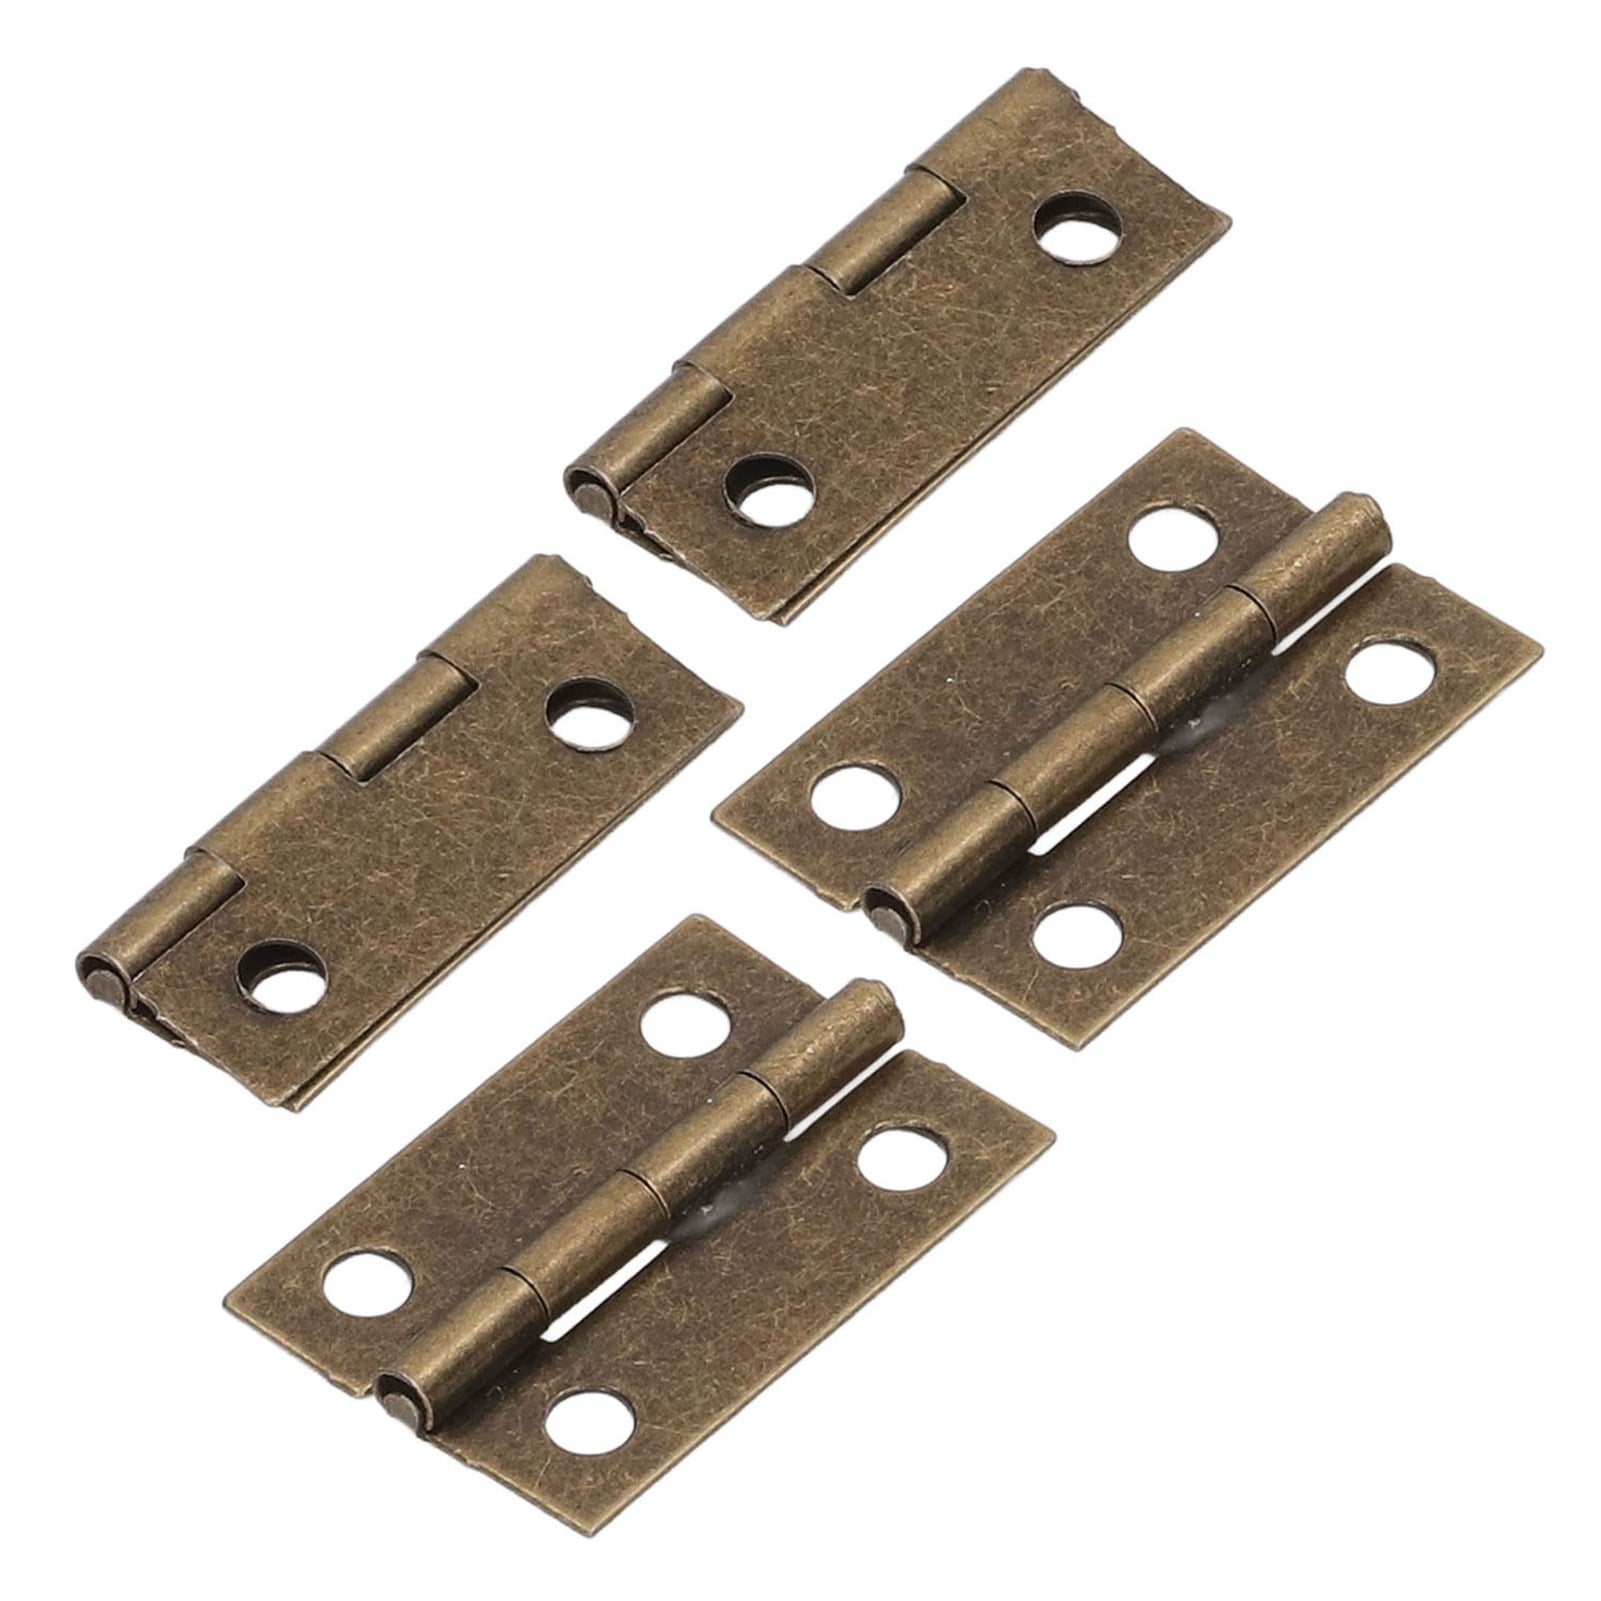 50Pcs Jewelry Box Hinges 0.6x0.9in Durable Metal Retro Style Zinc ...